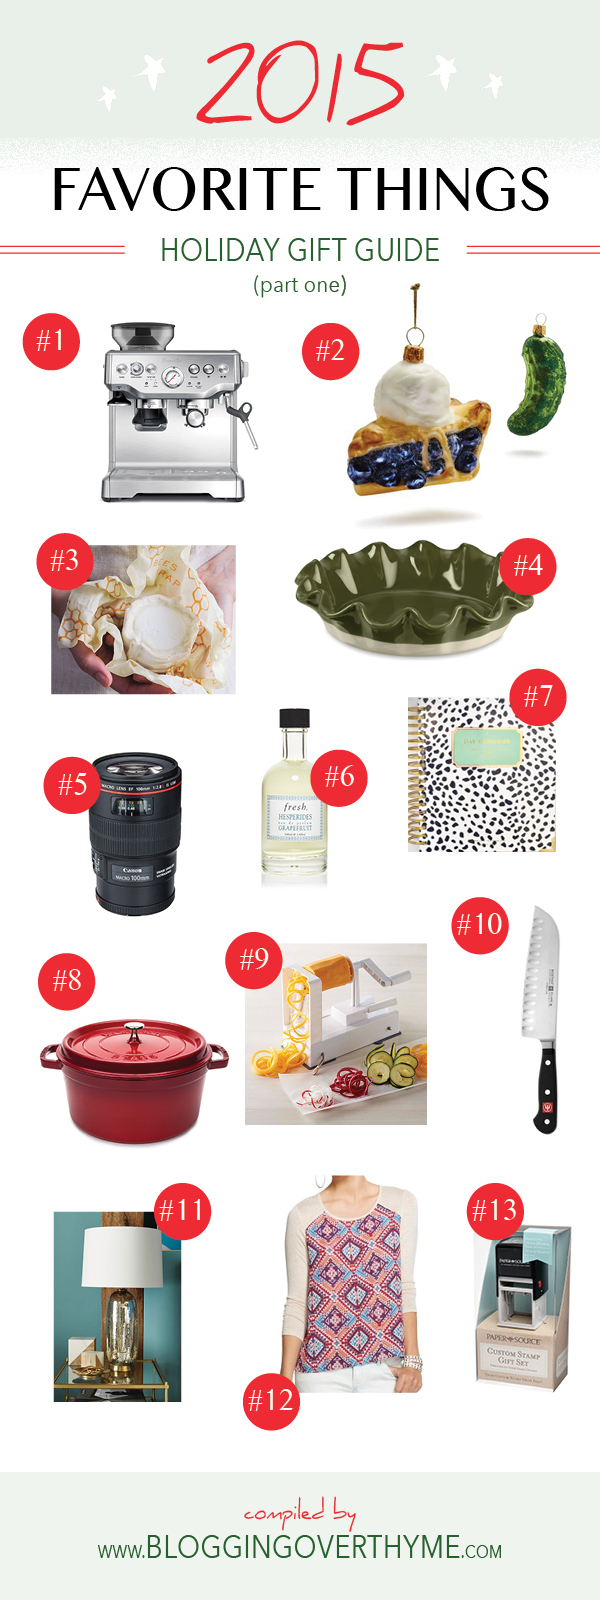 Gift Guides 2013: Pretty + Functional Kitchen Things — Edible